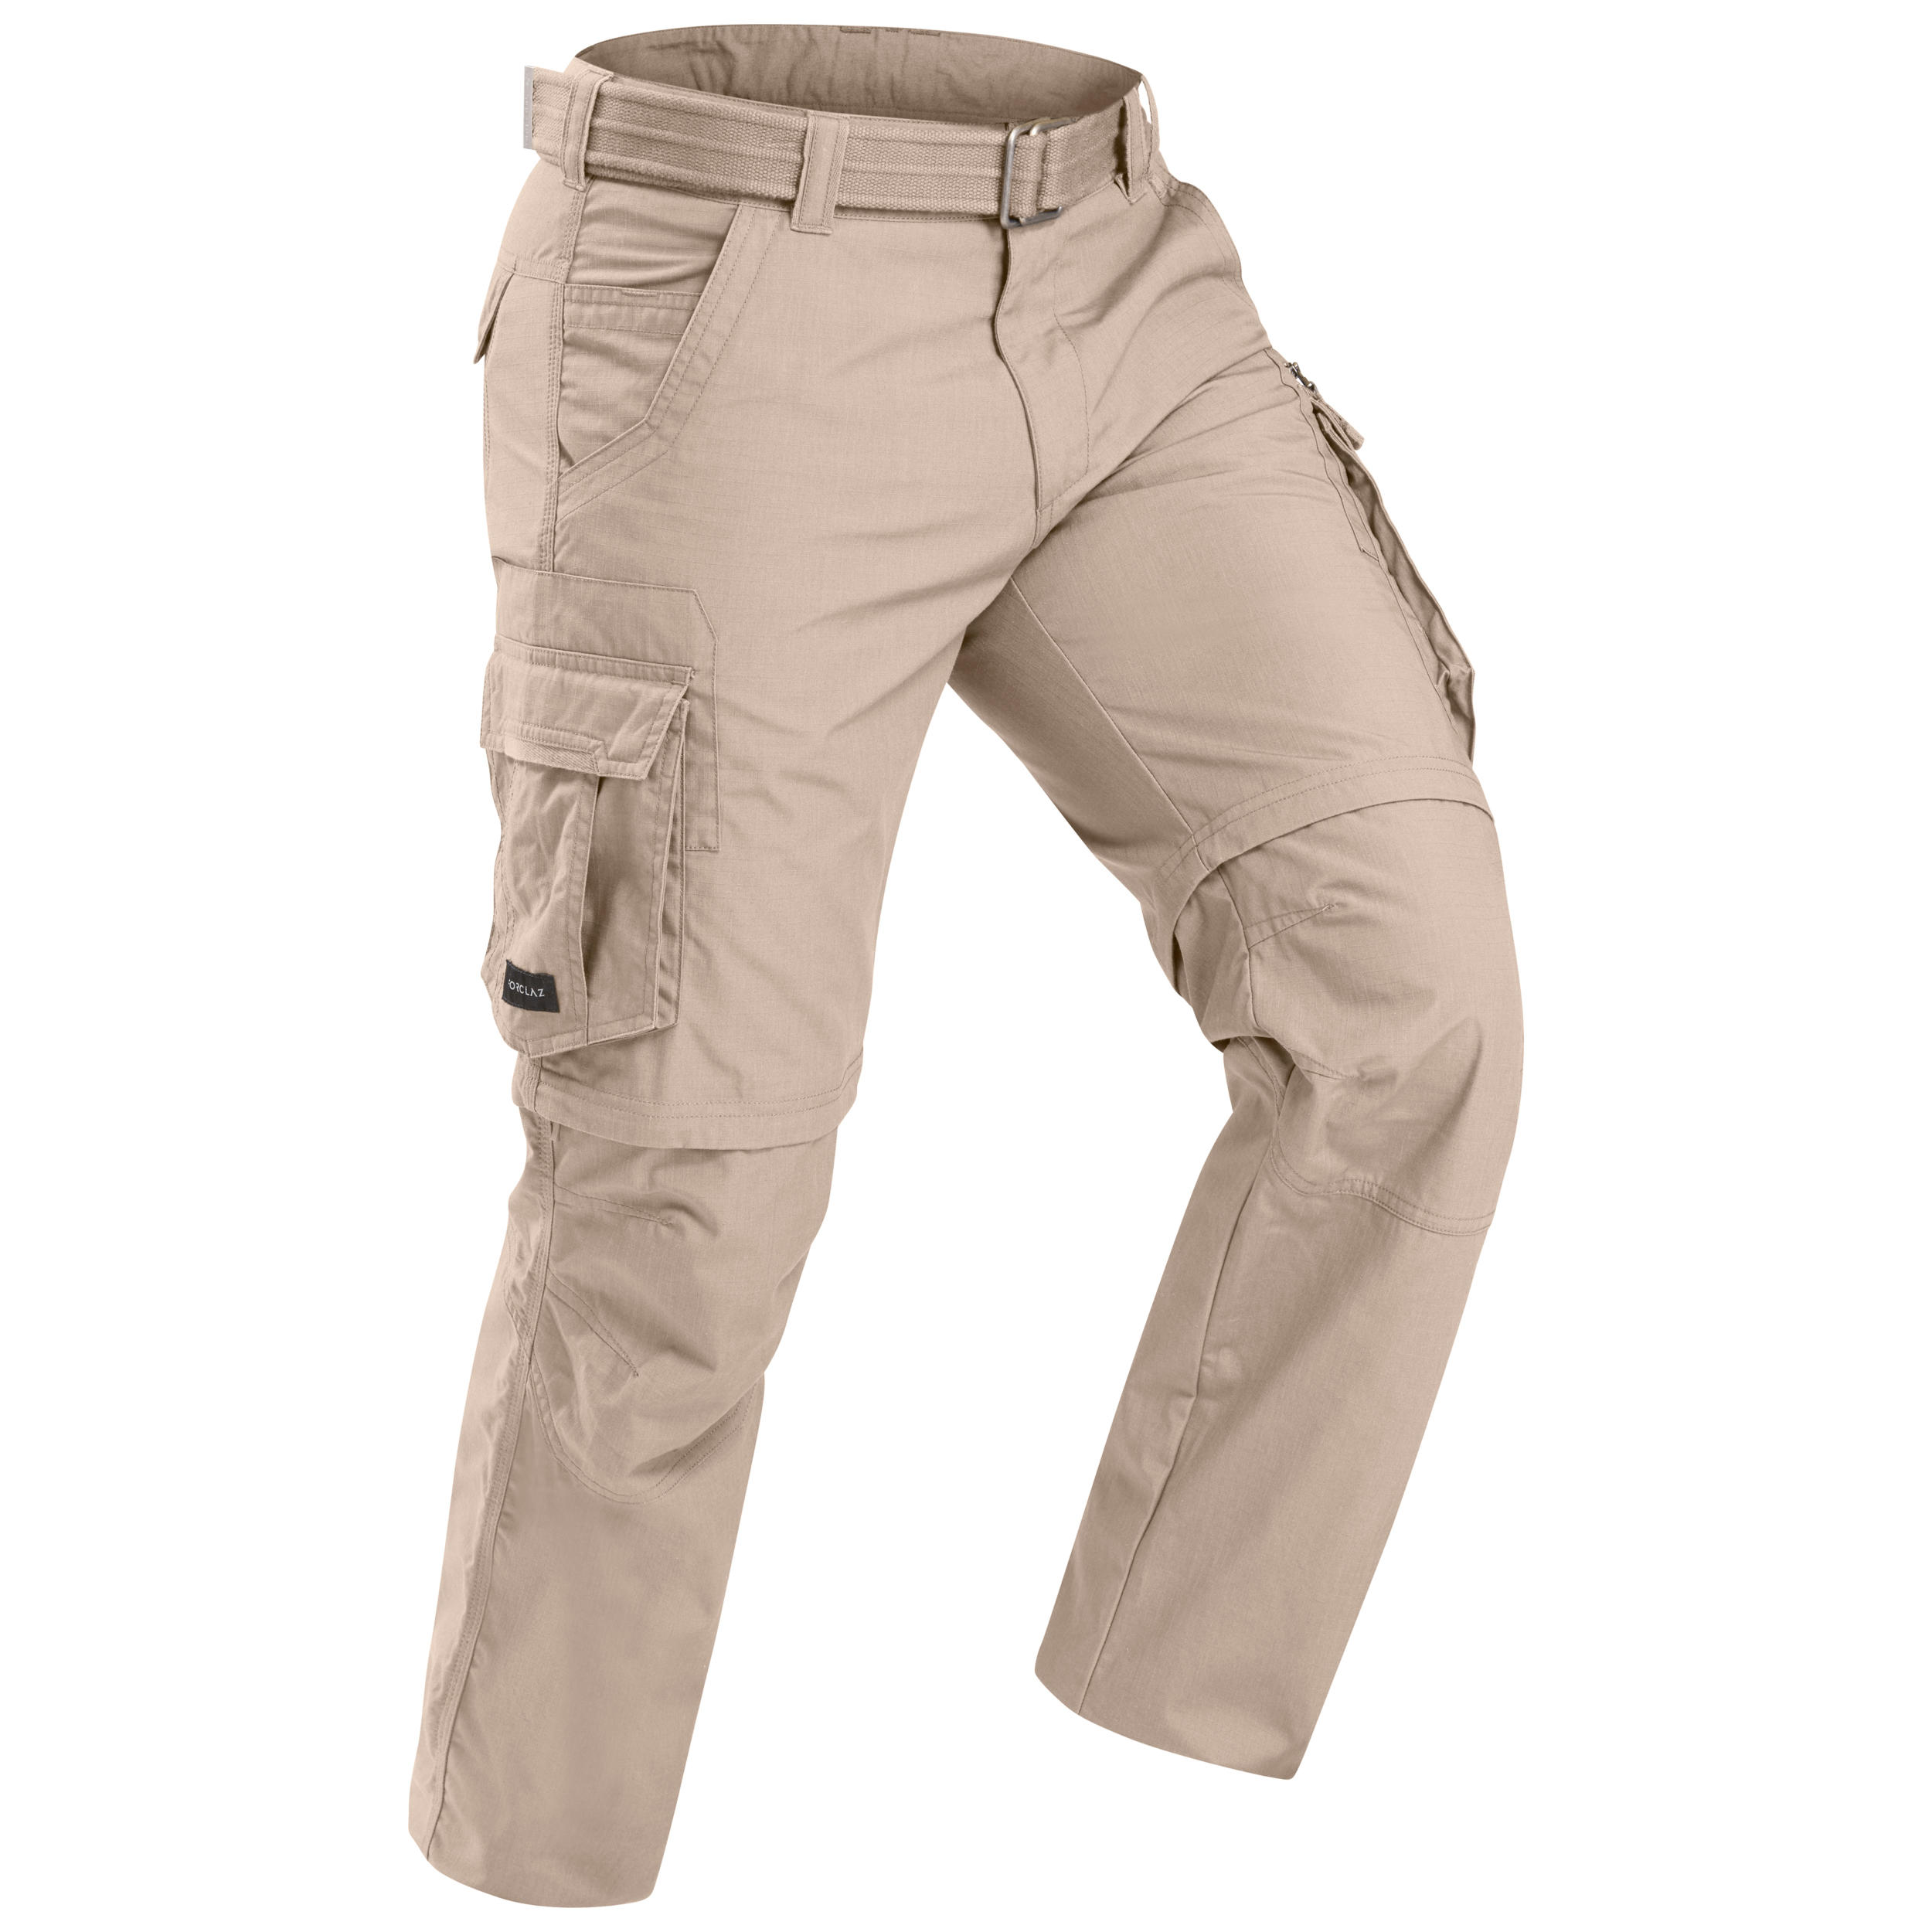 Marks  Spencer Crease Resistant Active Waistband Travel Trousers  Dark  Grey  Konga Online Shopping